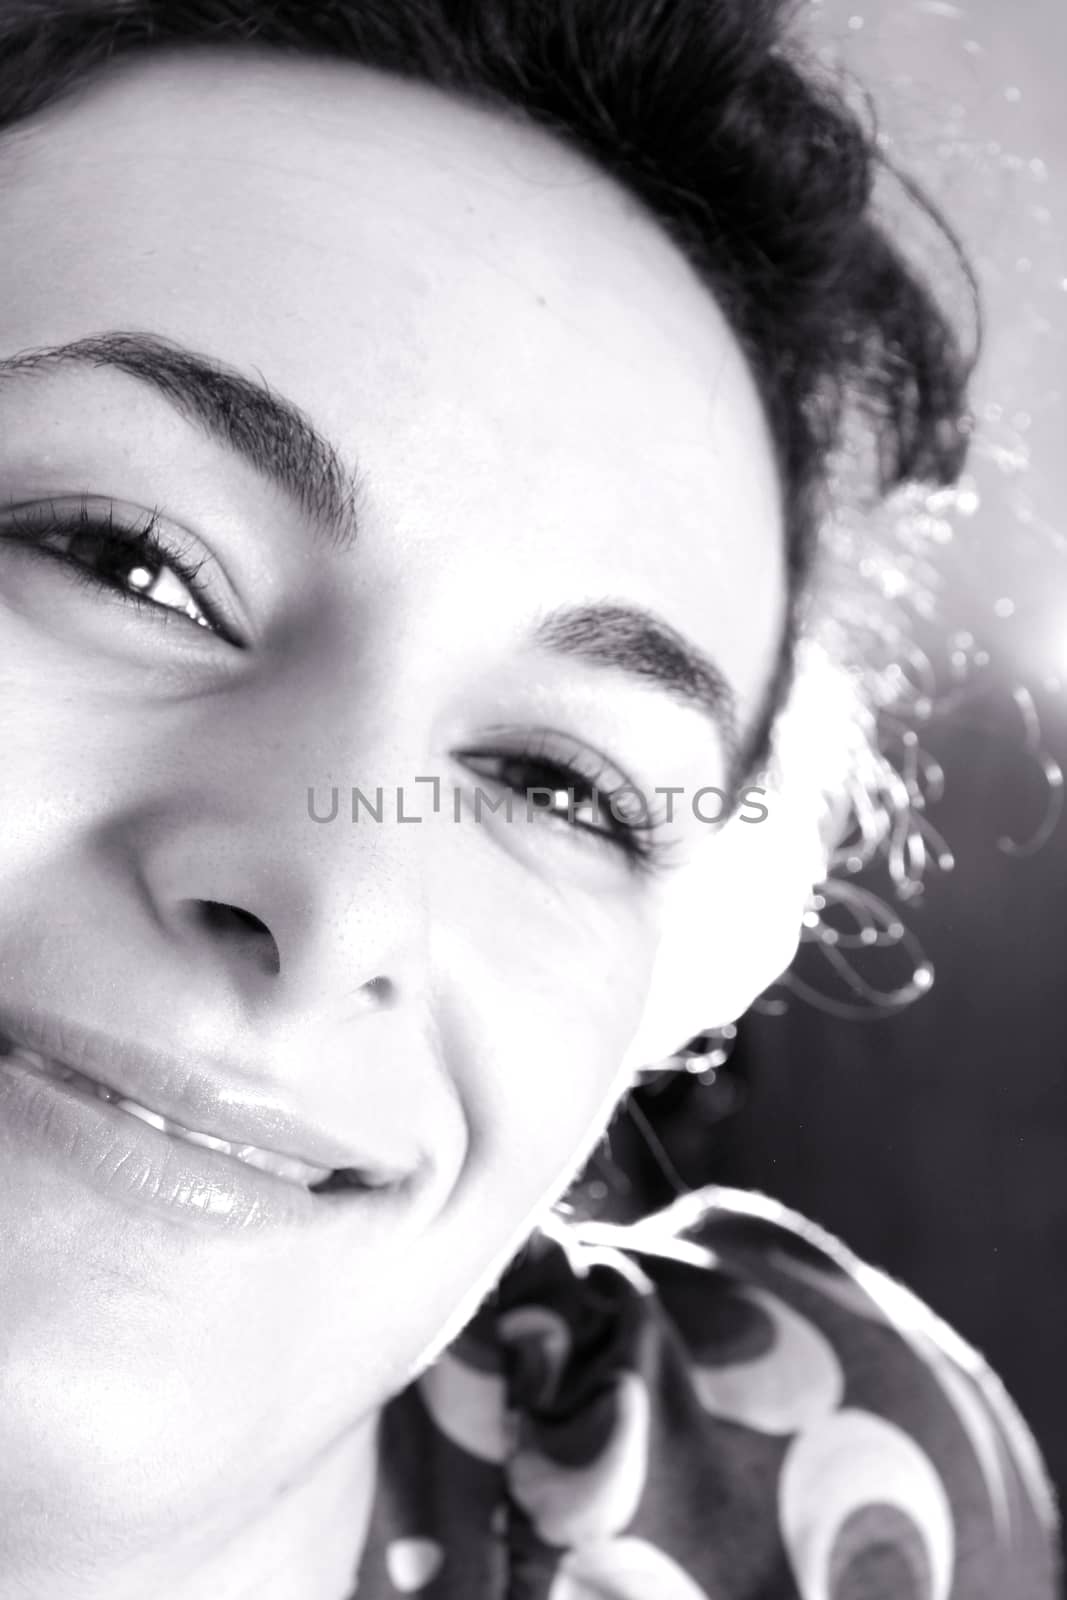 Beautiful face of woman. For more photos with this model fell free to visit my portfolio !